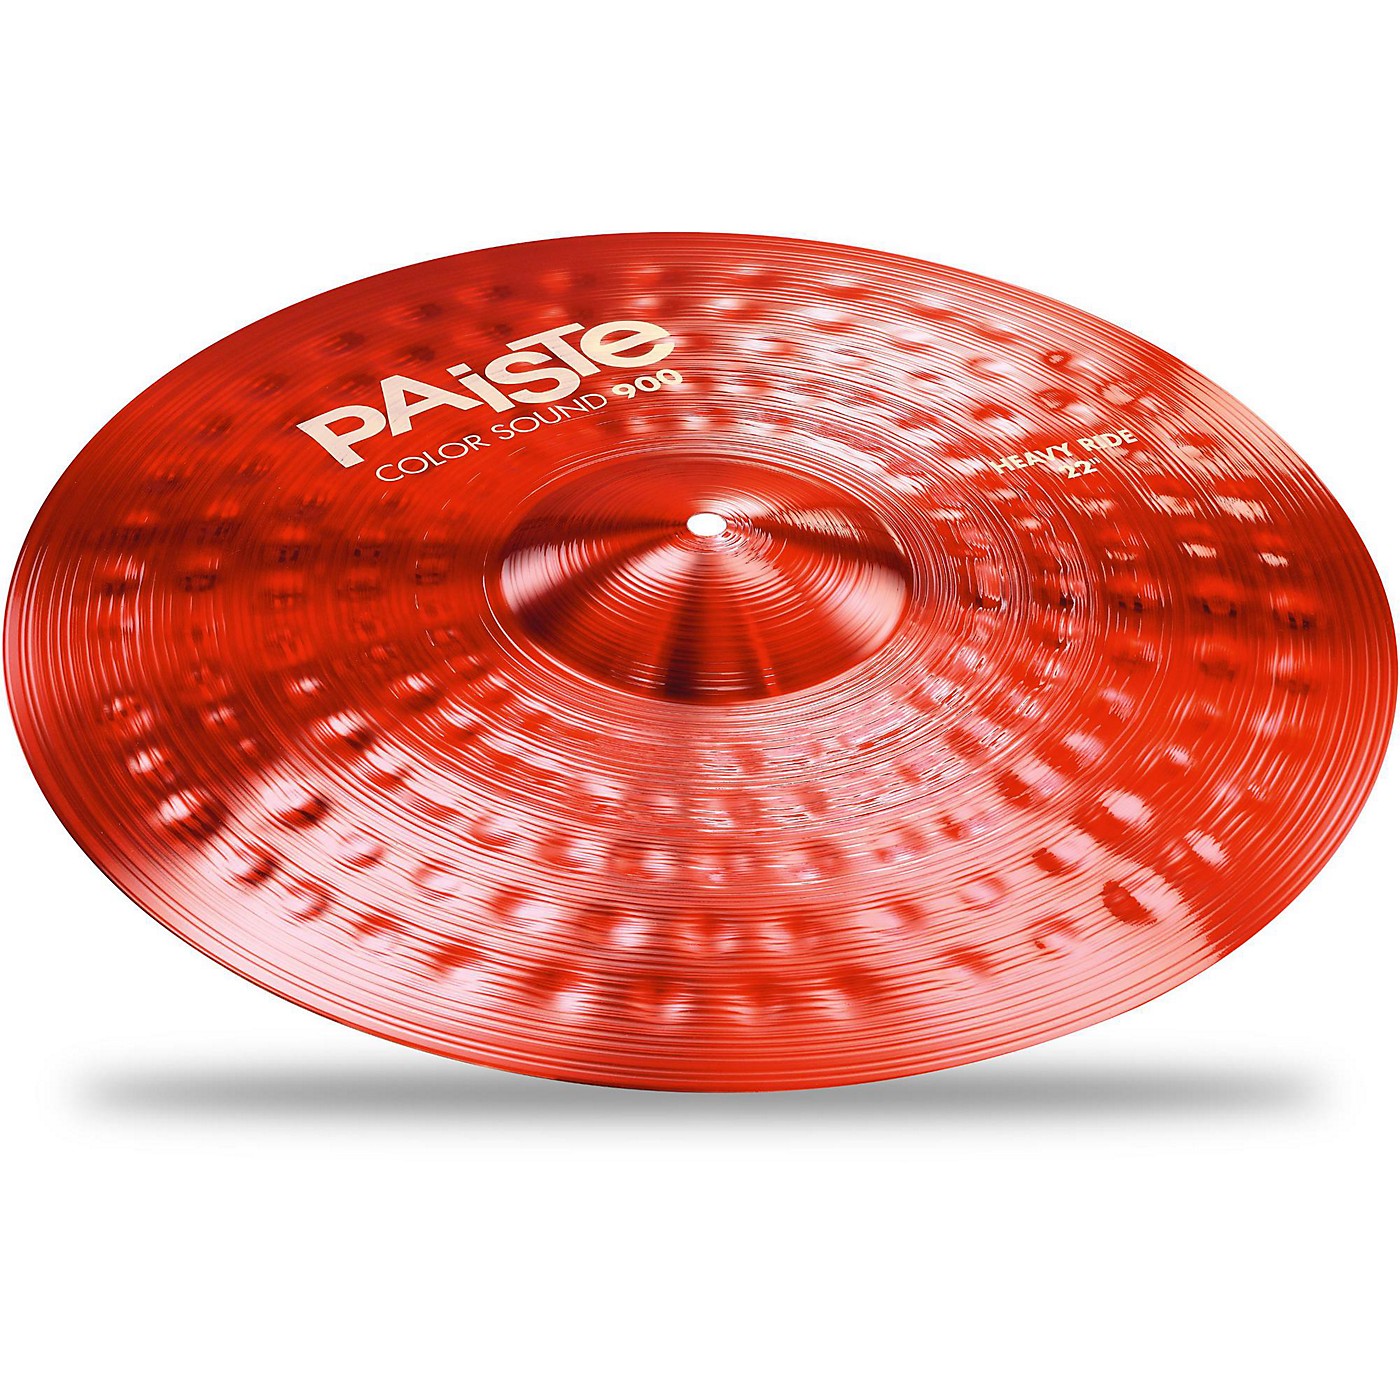 Paiste Colorsound 900 Heavy Ride Cymbal Red thumbnail